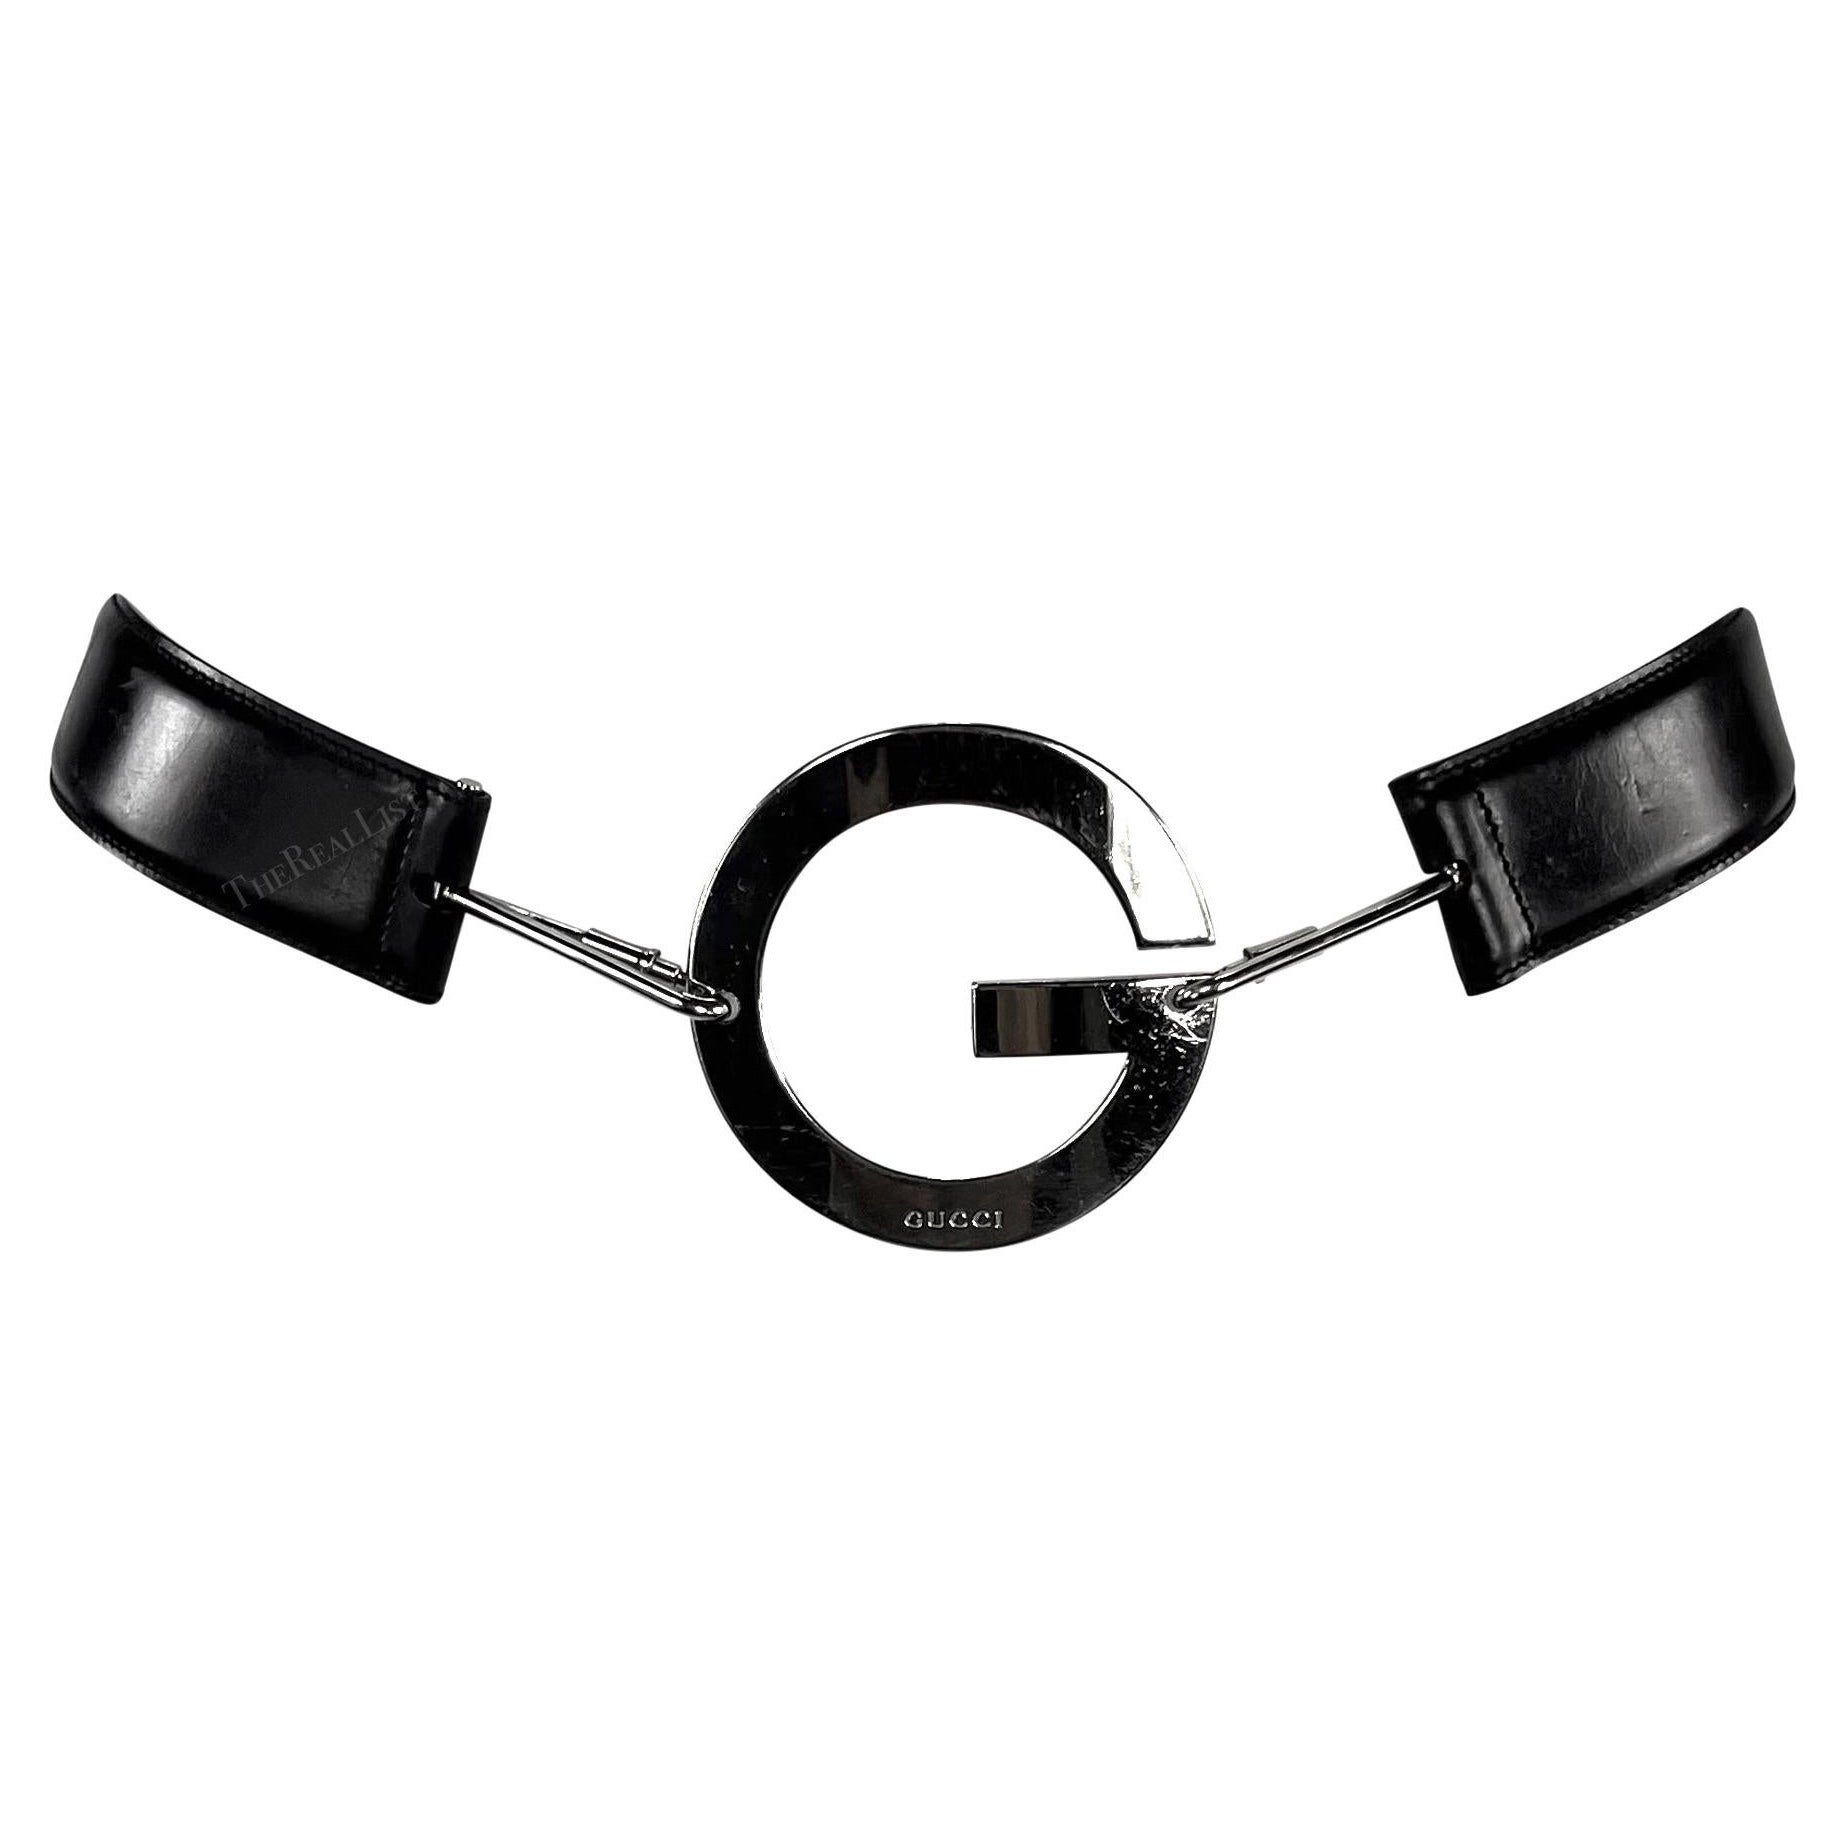 S/S 1996 Gucci by Tom Ford Silver Round G Medallion Buckle Black Belt For Sale